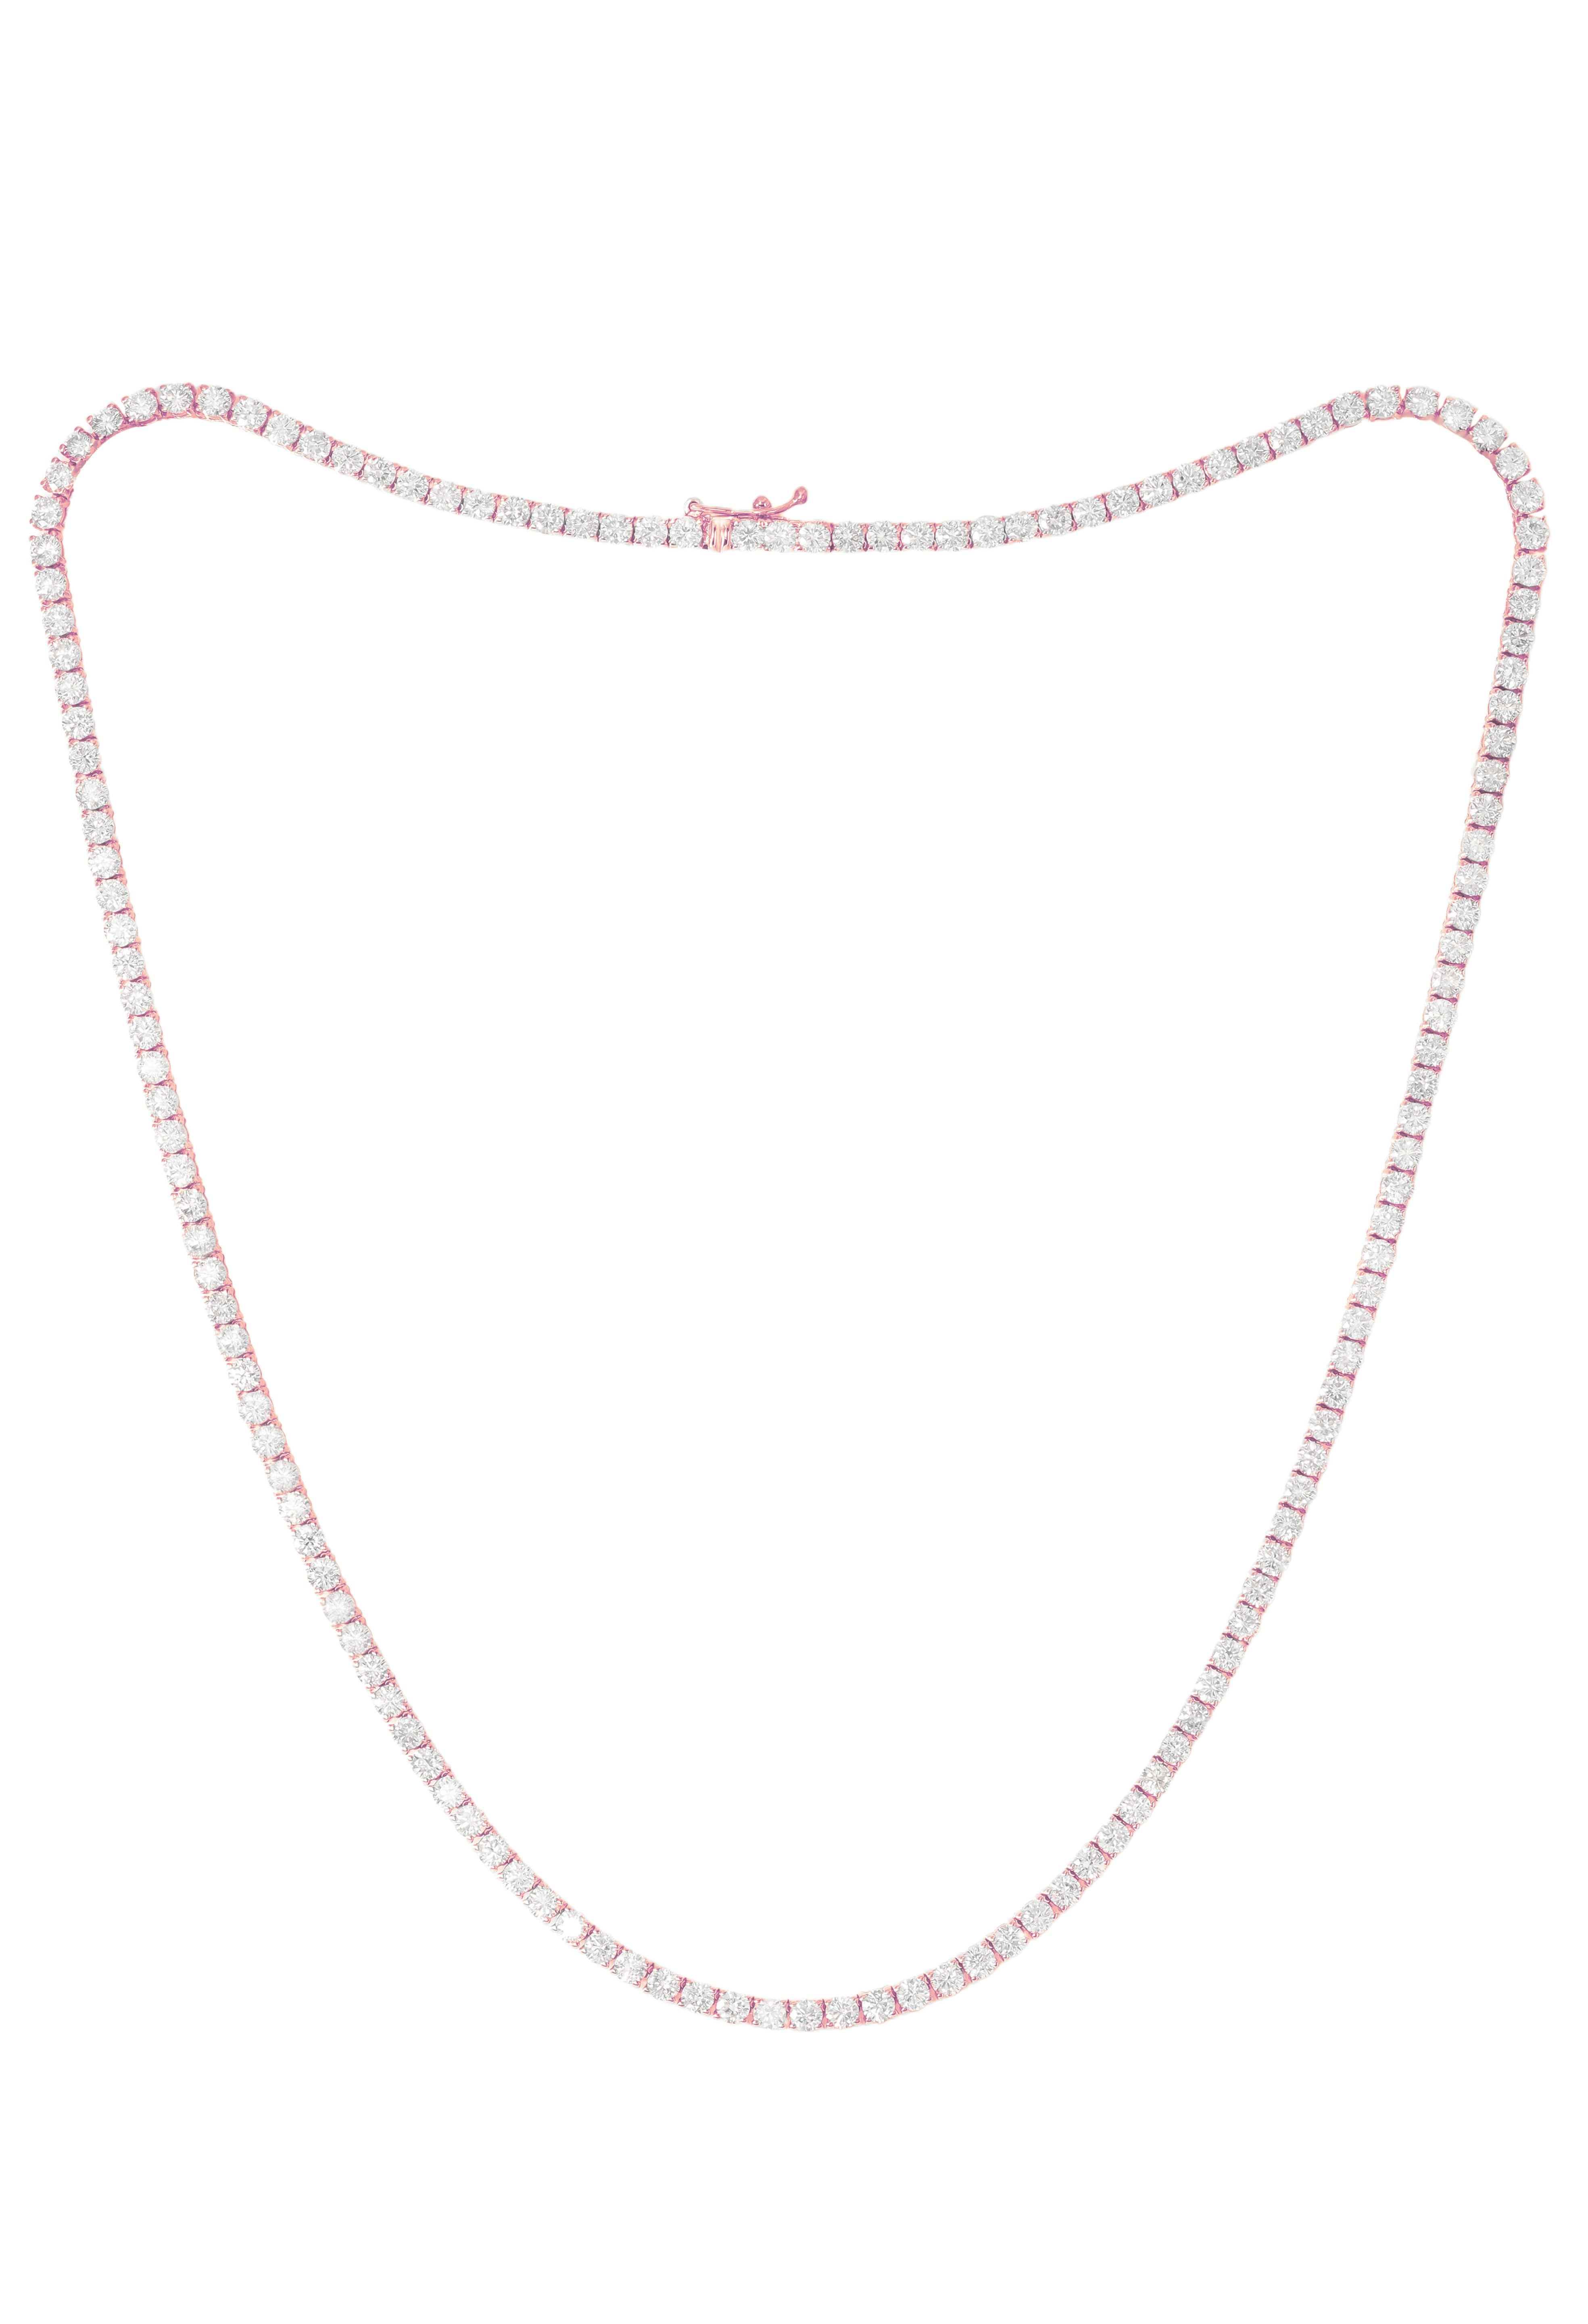 14K Rose Gold Diamond Straight Line Tennis Necklace Features 13.10Cts of Diamonds. Diana M. is a leading supplier of top-quality fine jewelry for over 35 years.
Diana M is one-stop shop for all your jewelry shopping, carrying line of diamond rings,